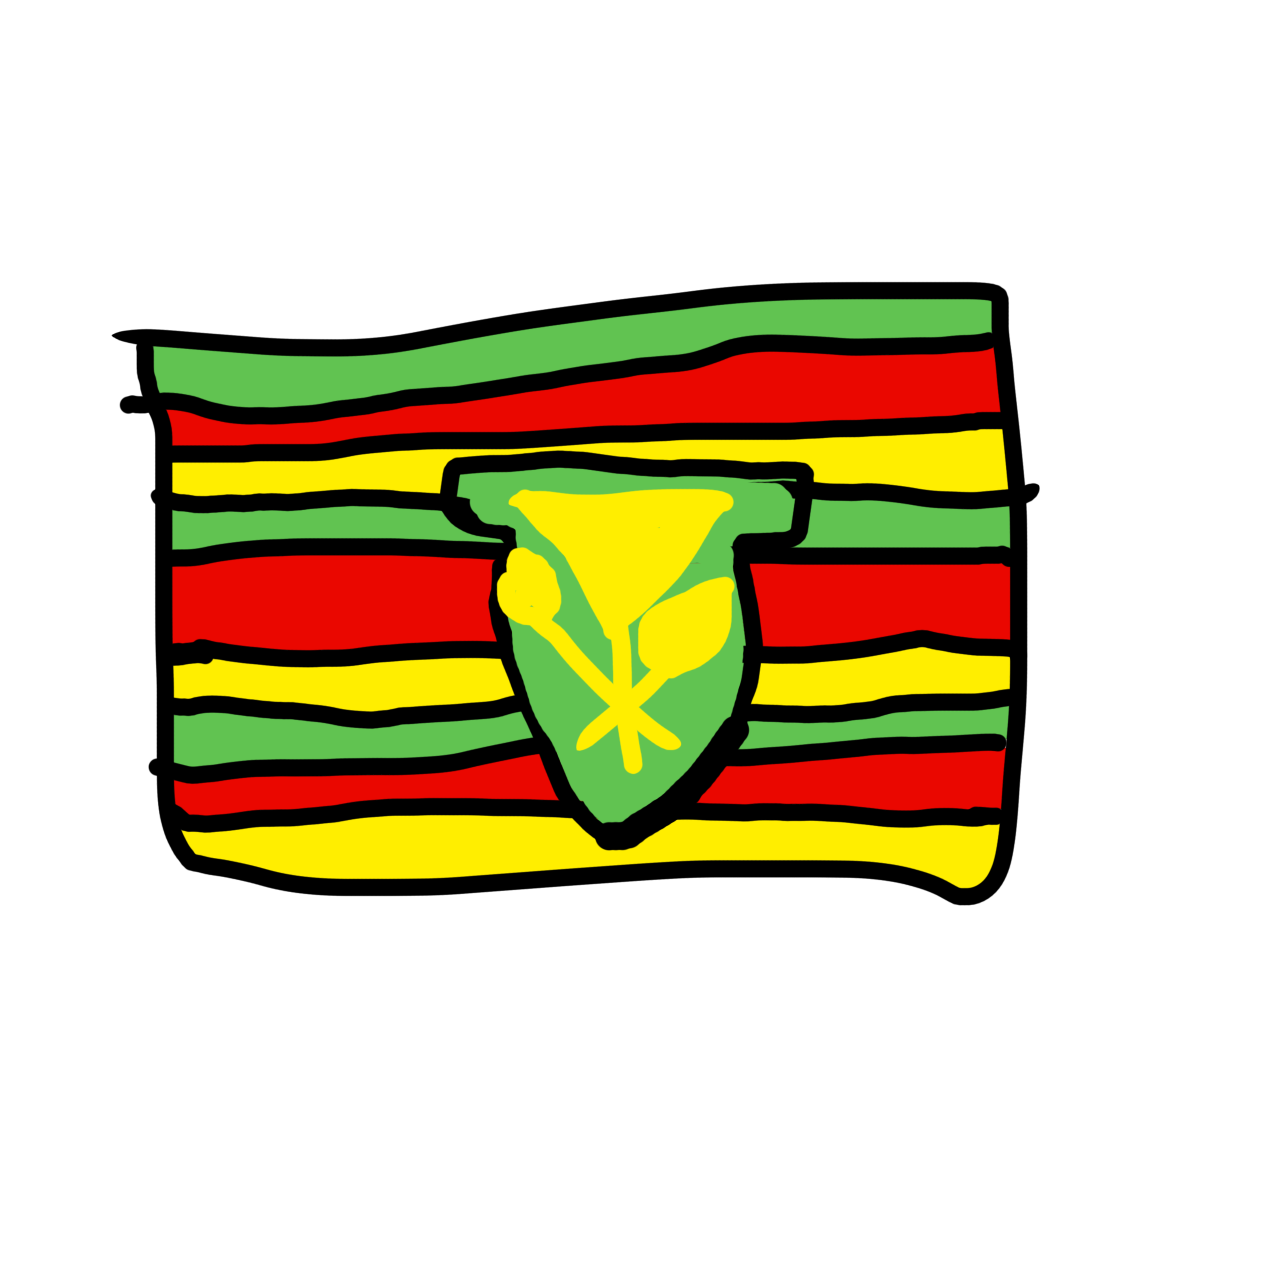 a flag with nine stripes alternating between green, red, and yellow. There’s a green shield in the center, with two paddles and a puela insignia in yellow.